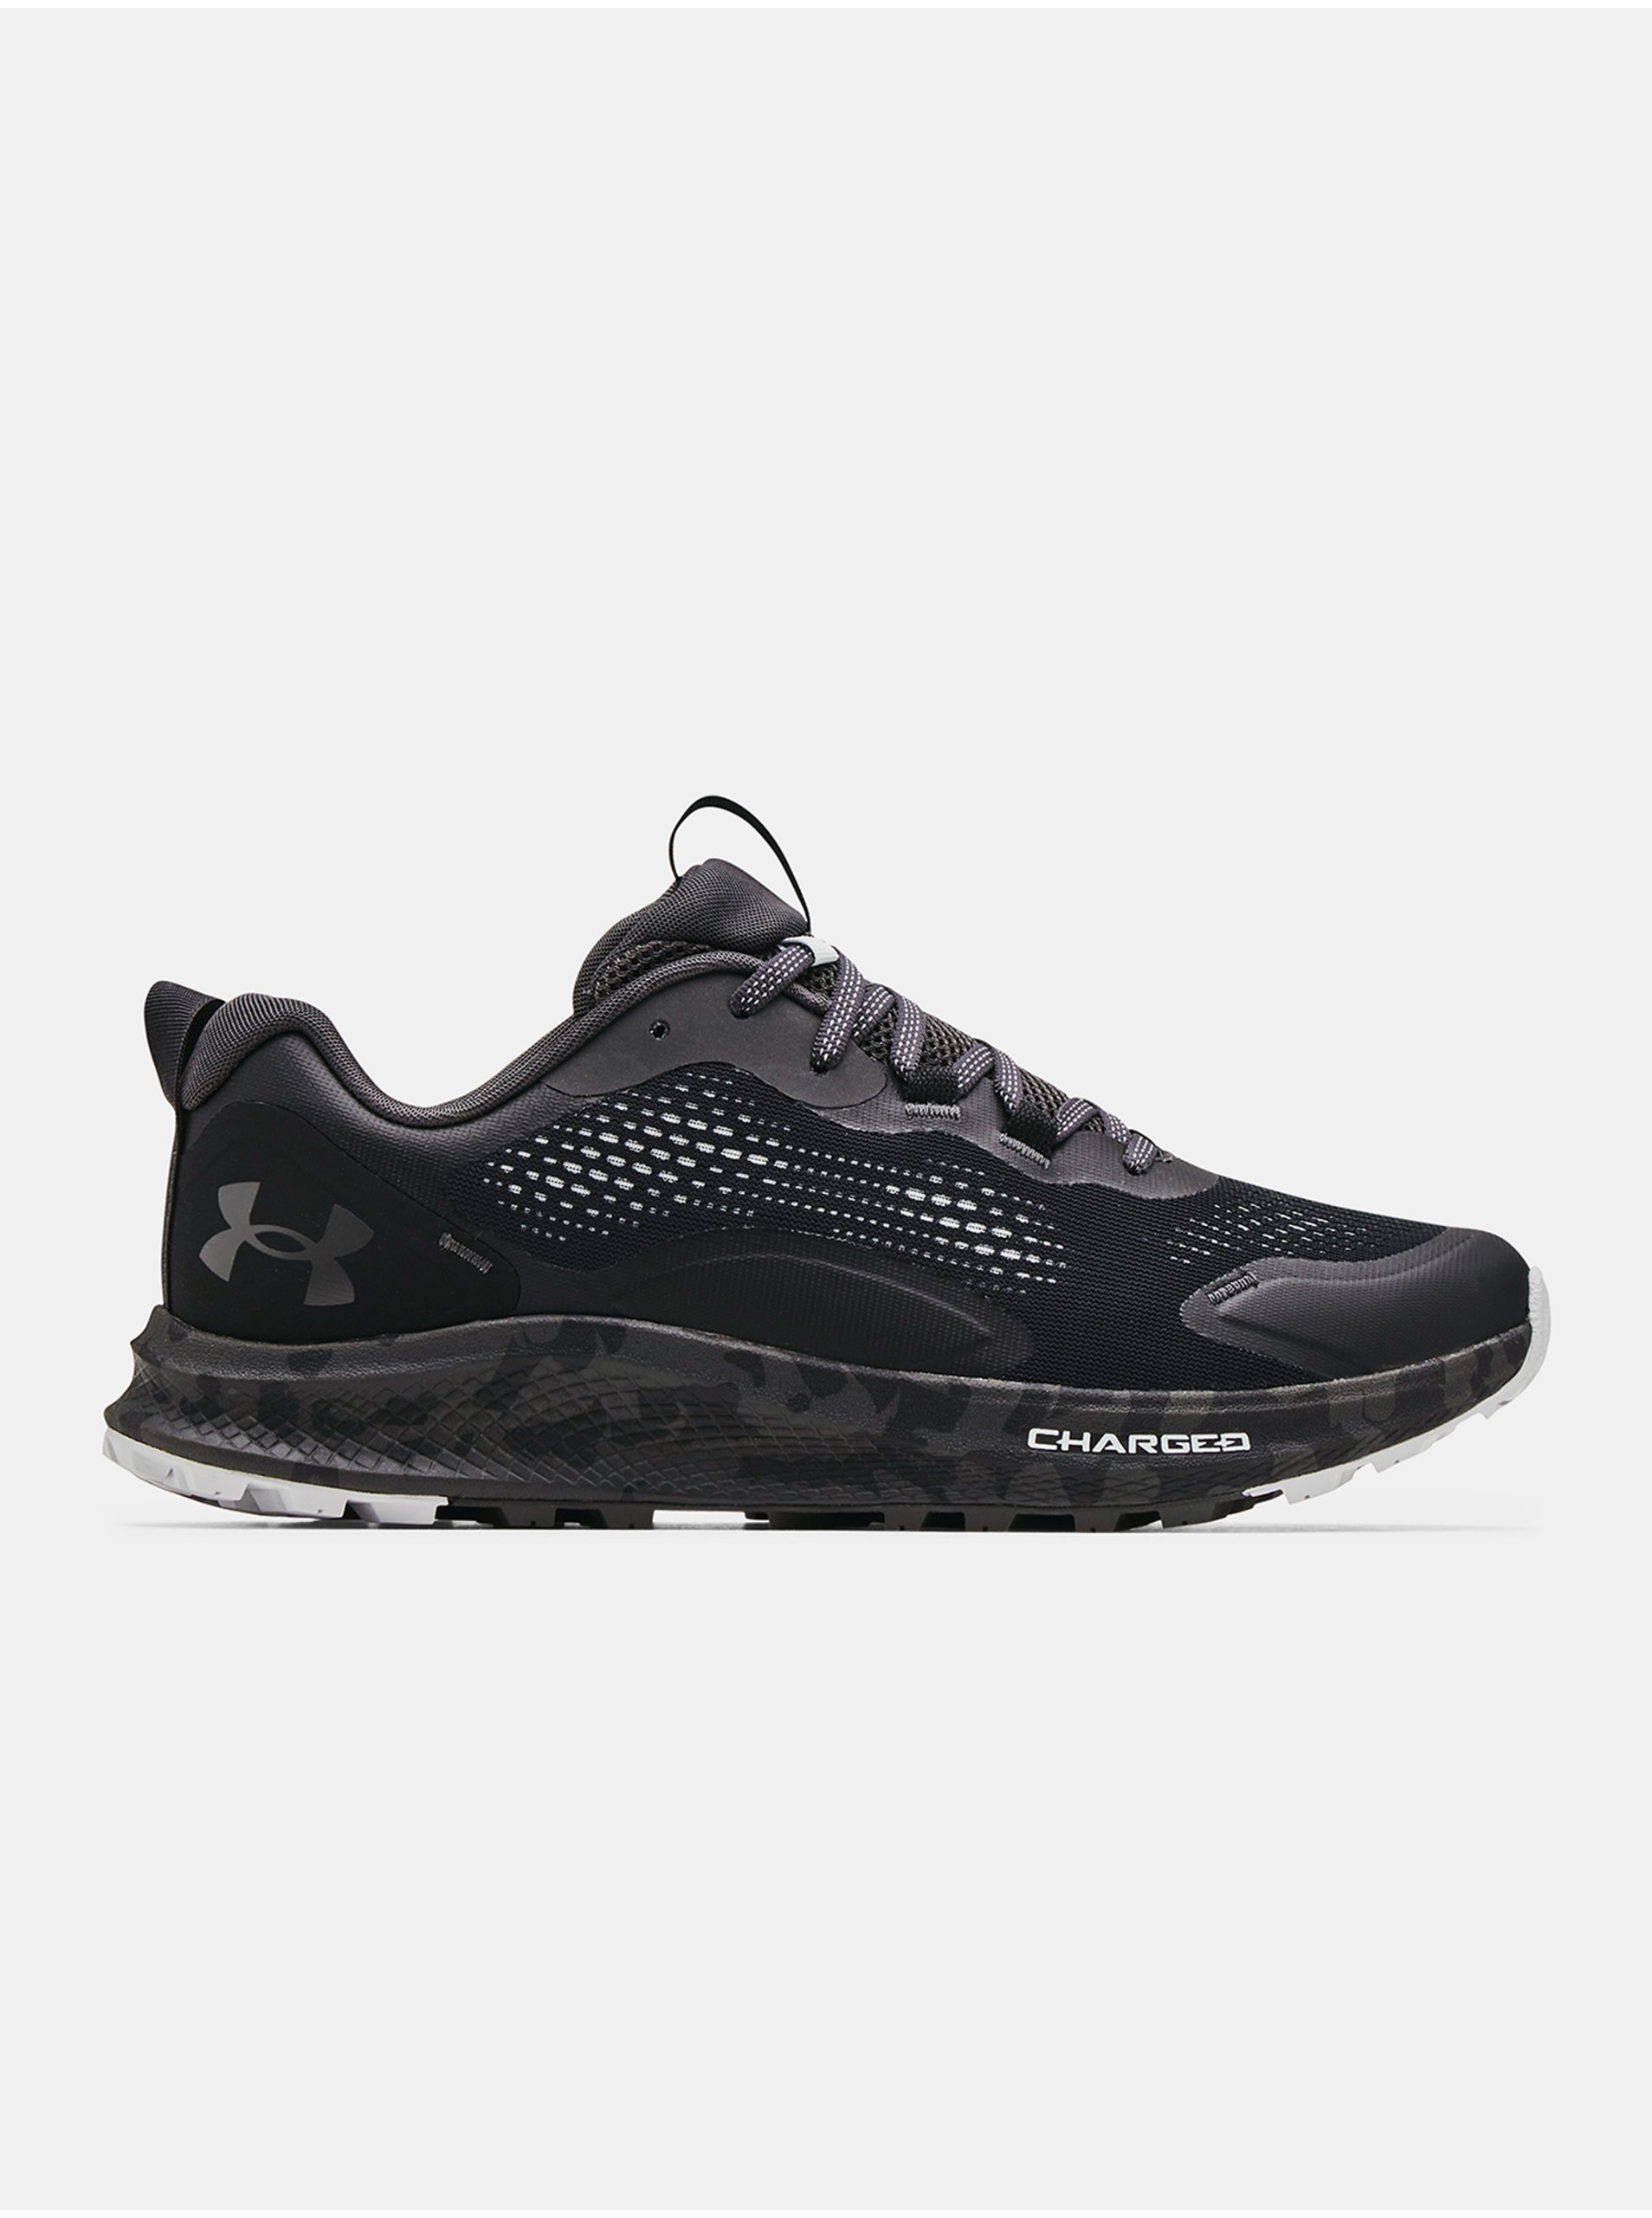 E-shop Boty Under Armour UA Charged Bandit TR 2-BLK